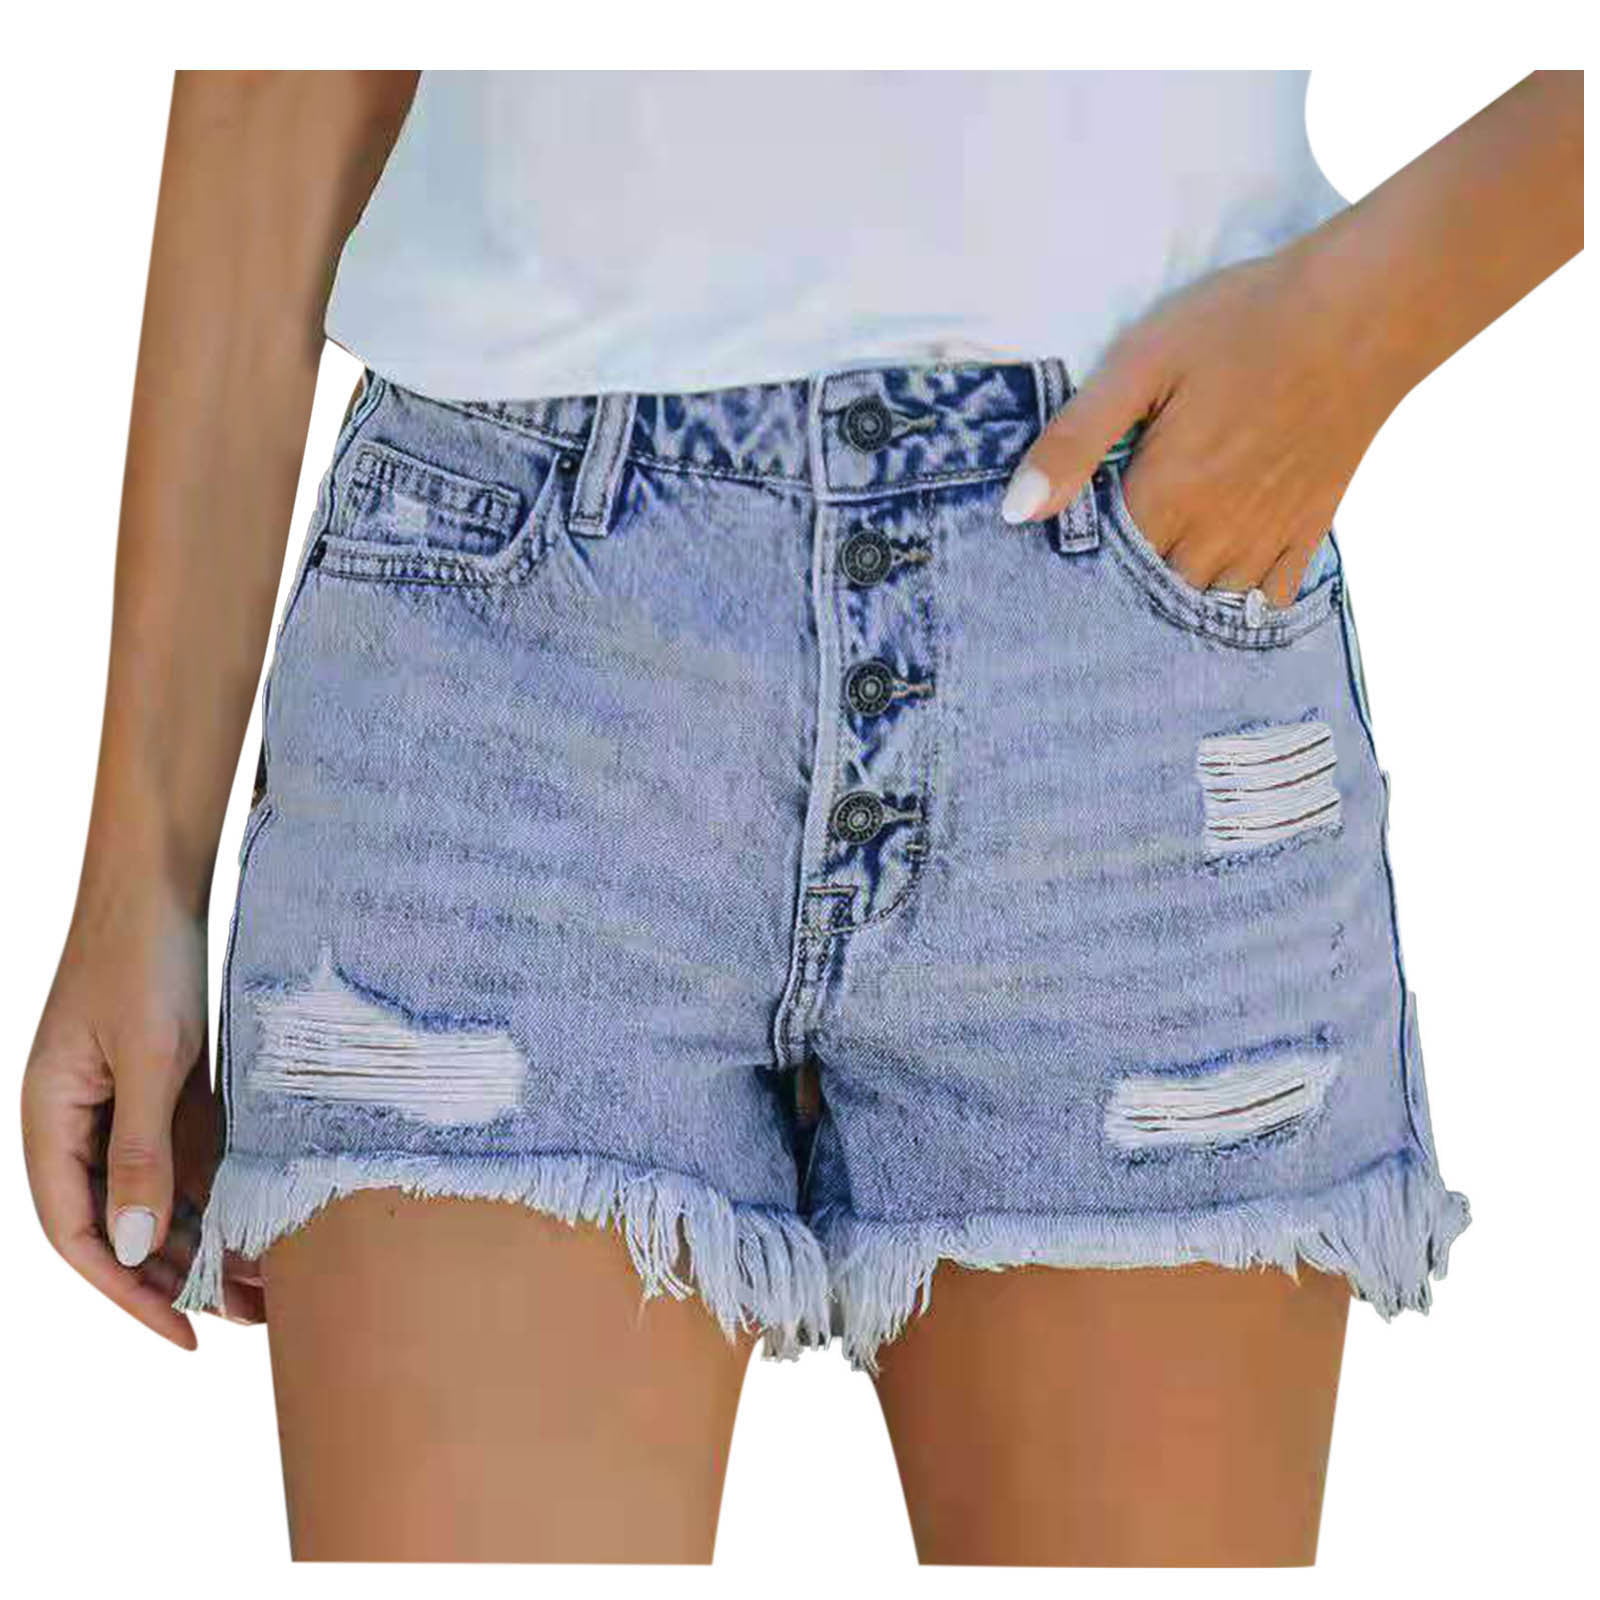 Womens Denim Shorts Summer Classic Ripped Destroyed Distressed Jeans Leggings Comfortable Stretch Skinny Pants bo